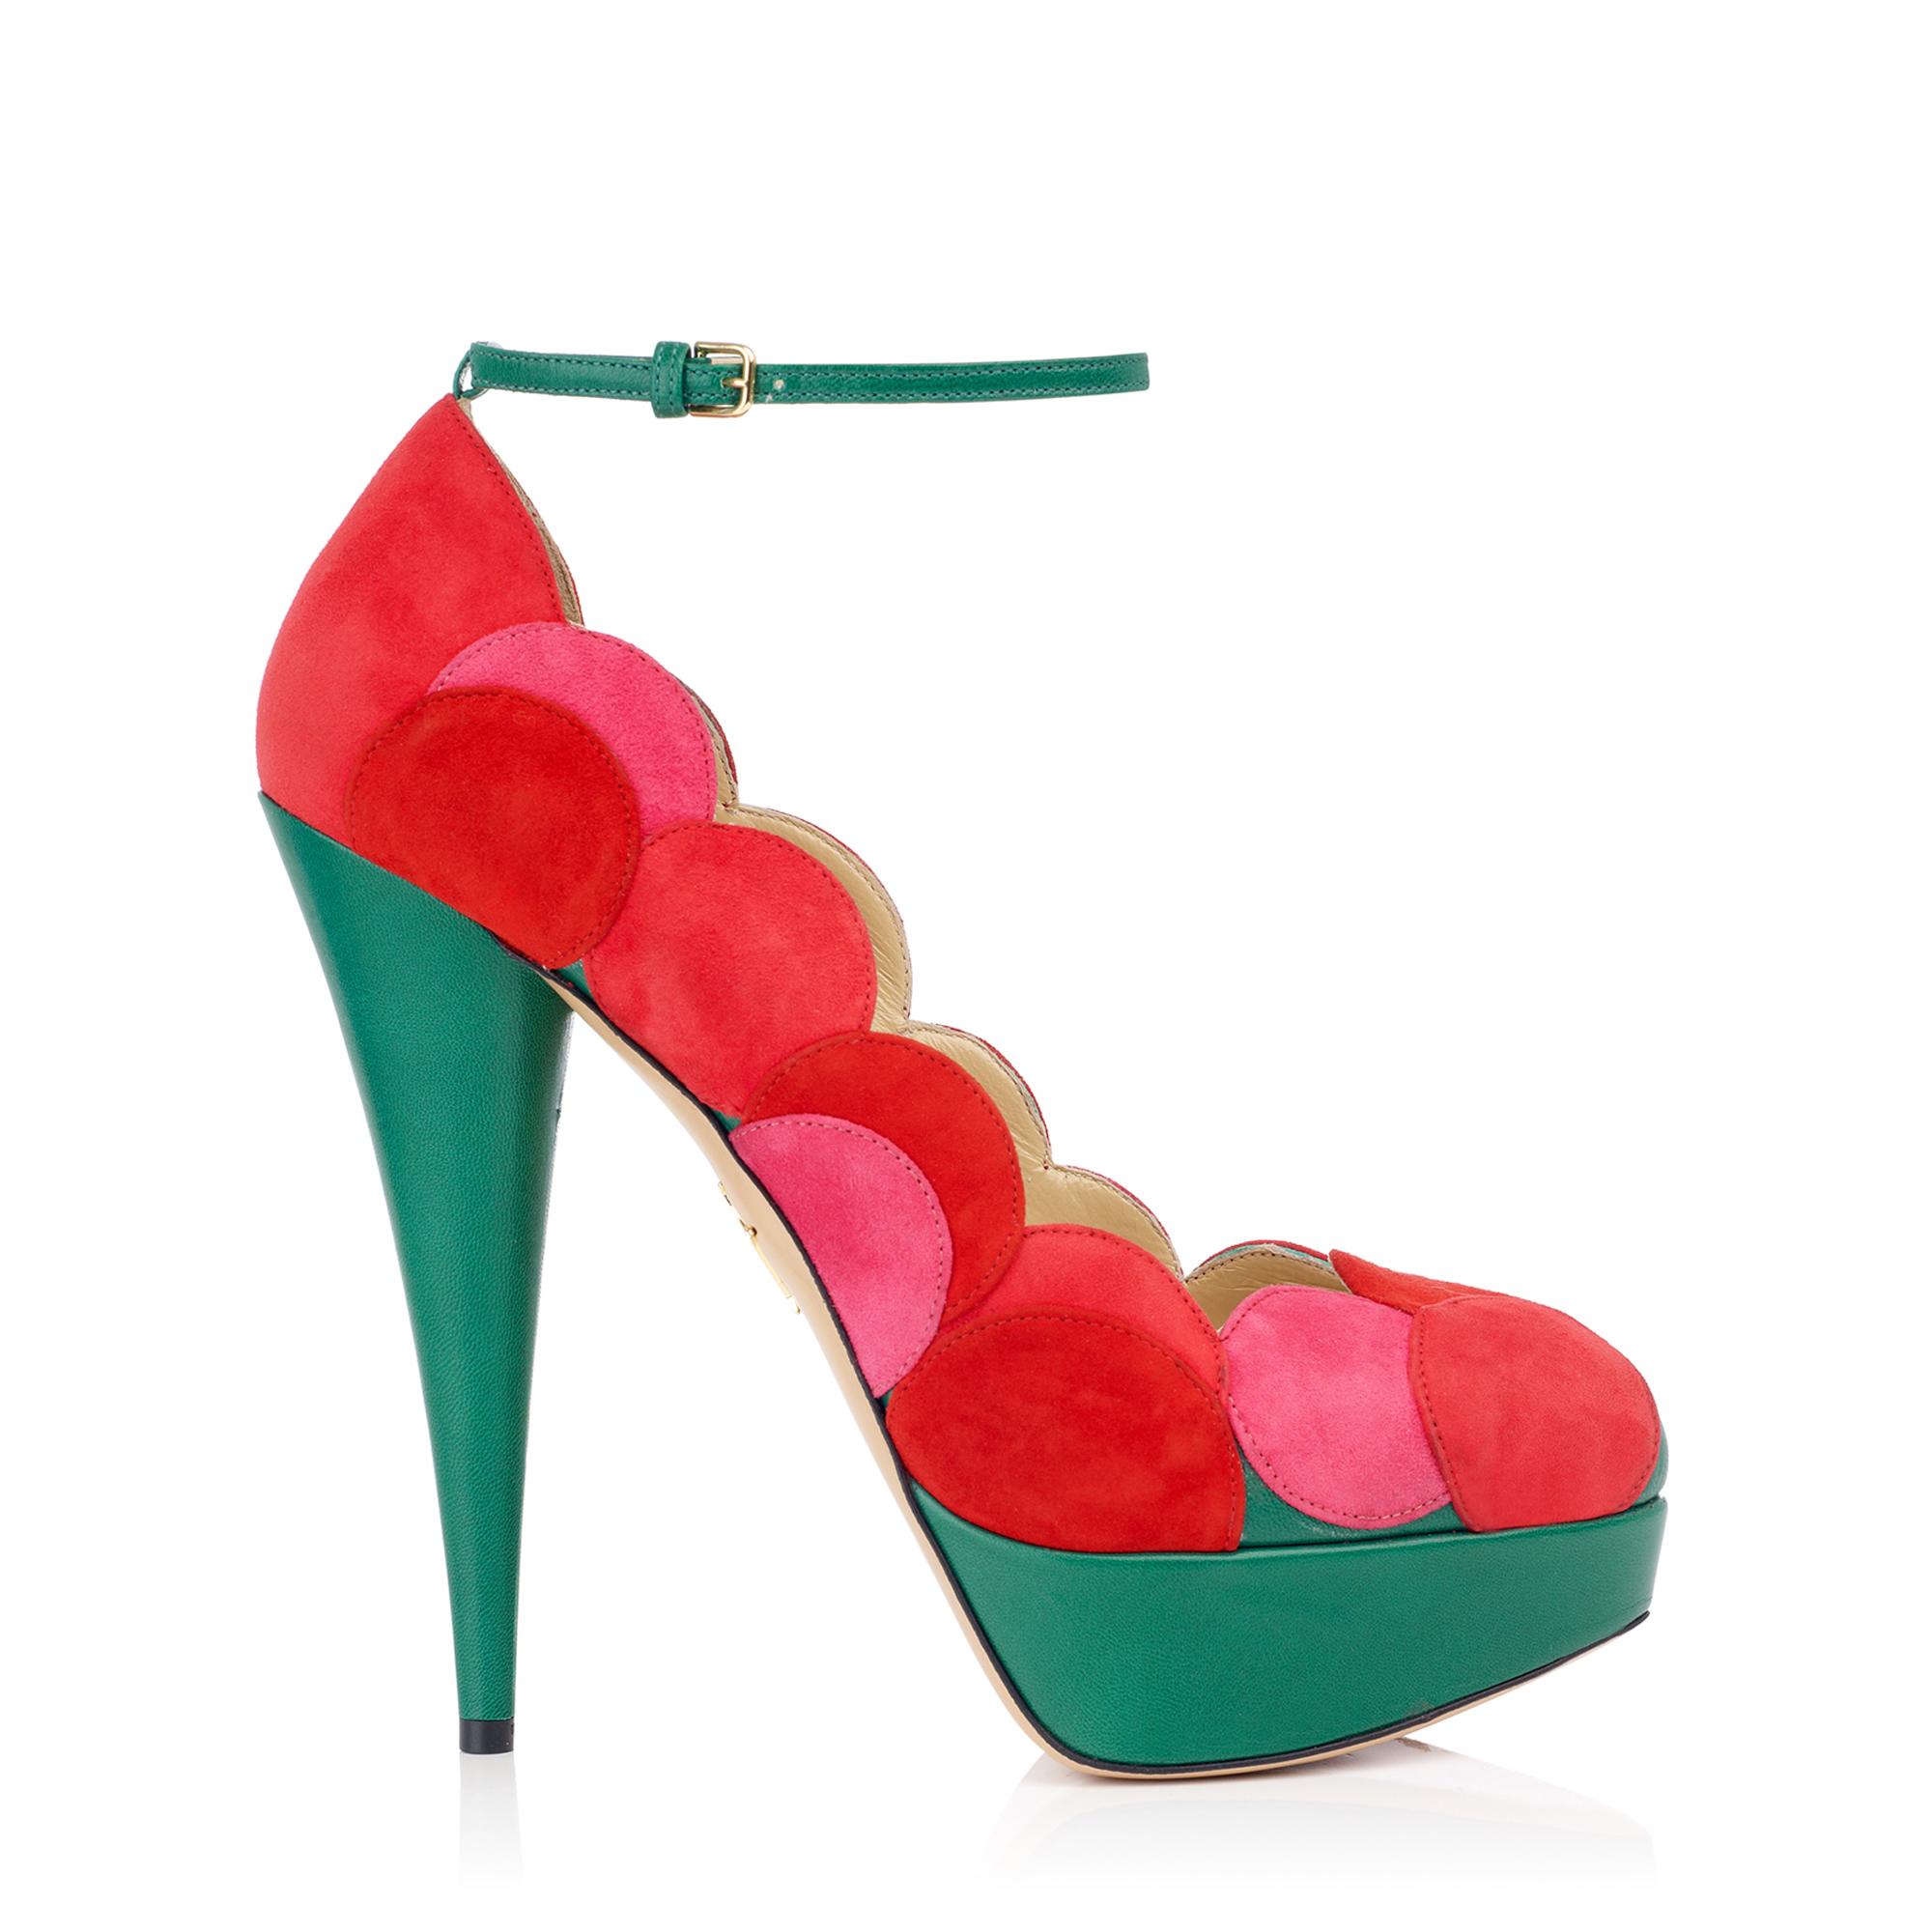 Charlotte Olympia You Scream in Red - Lyst